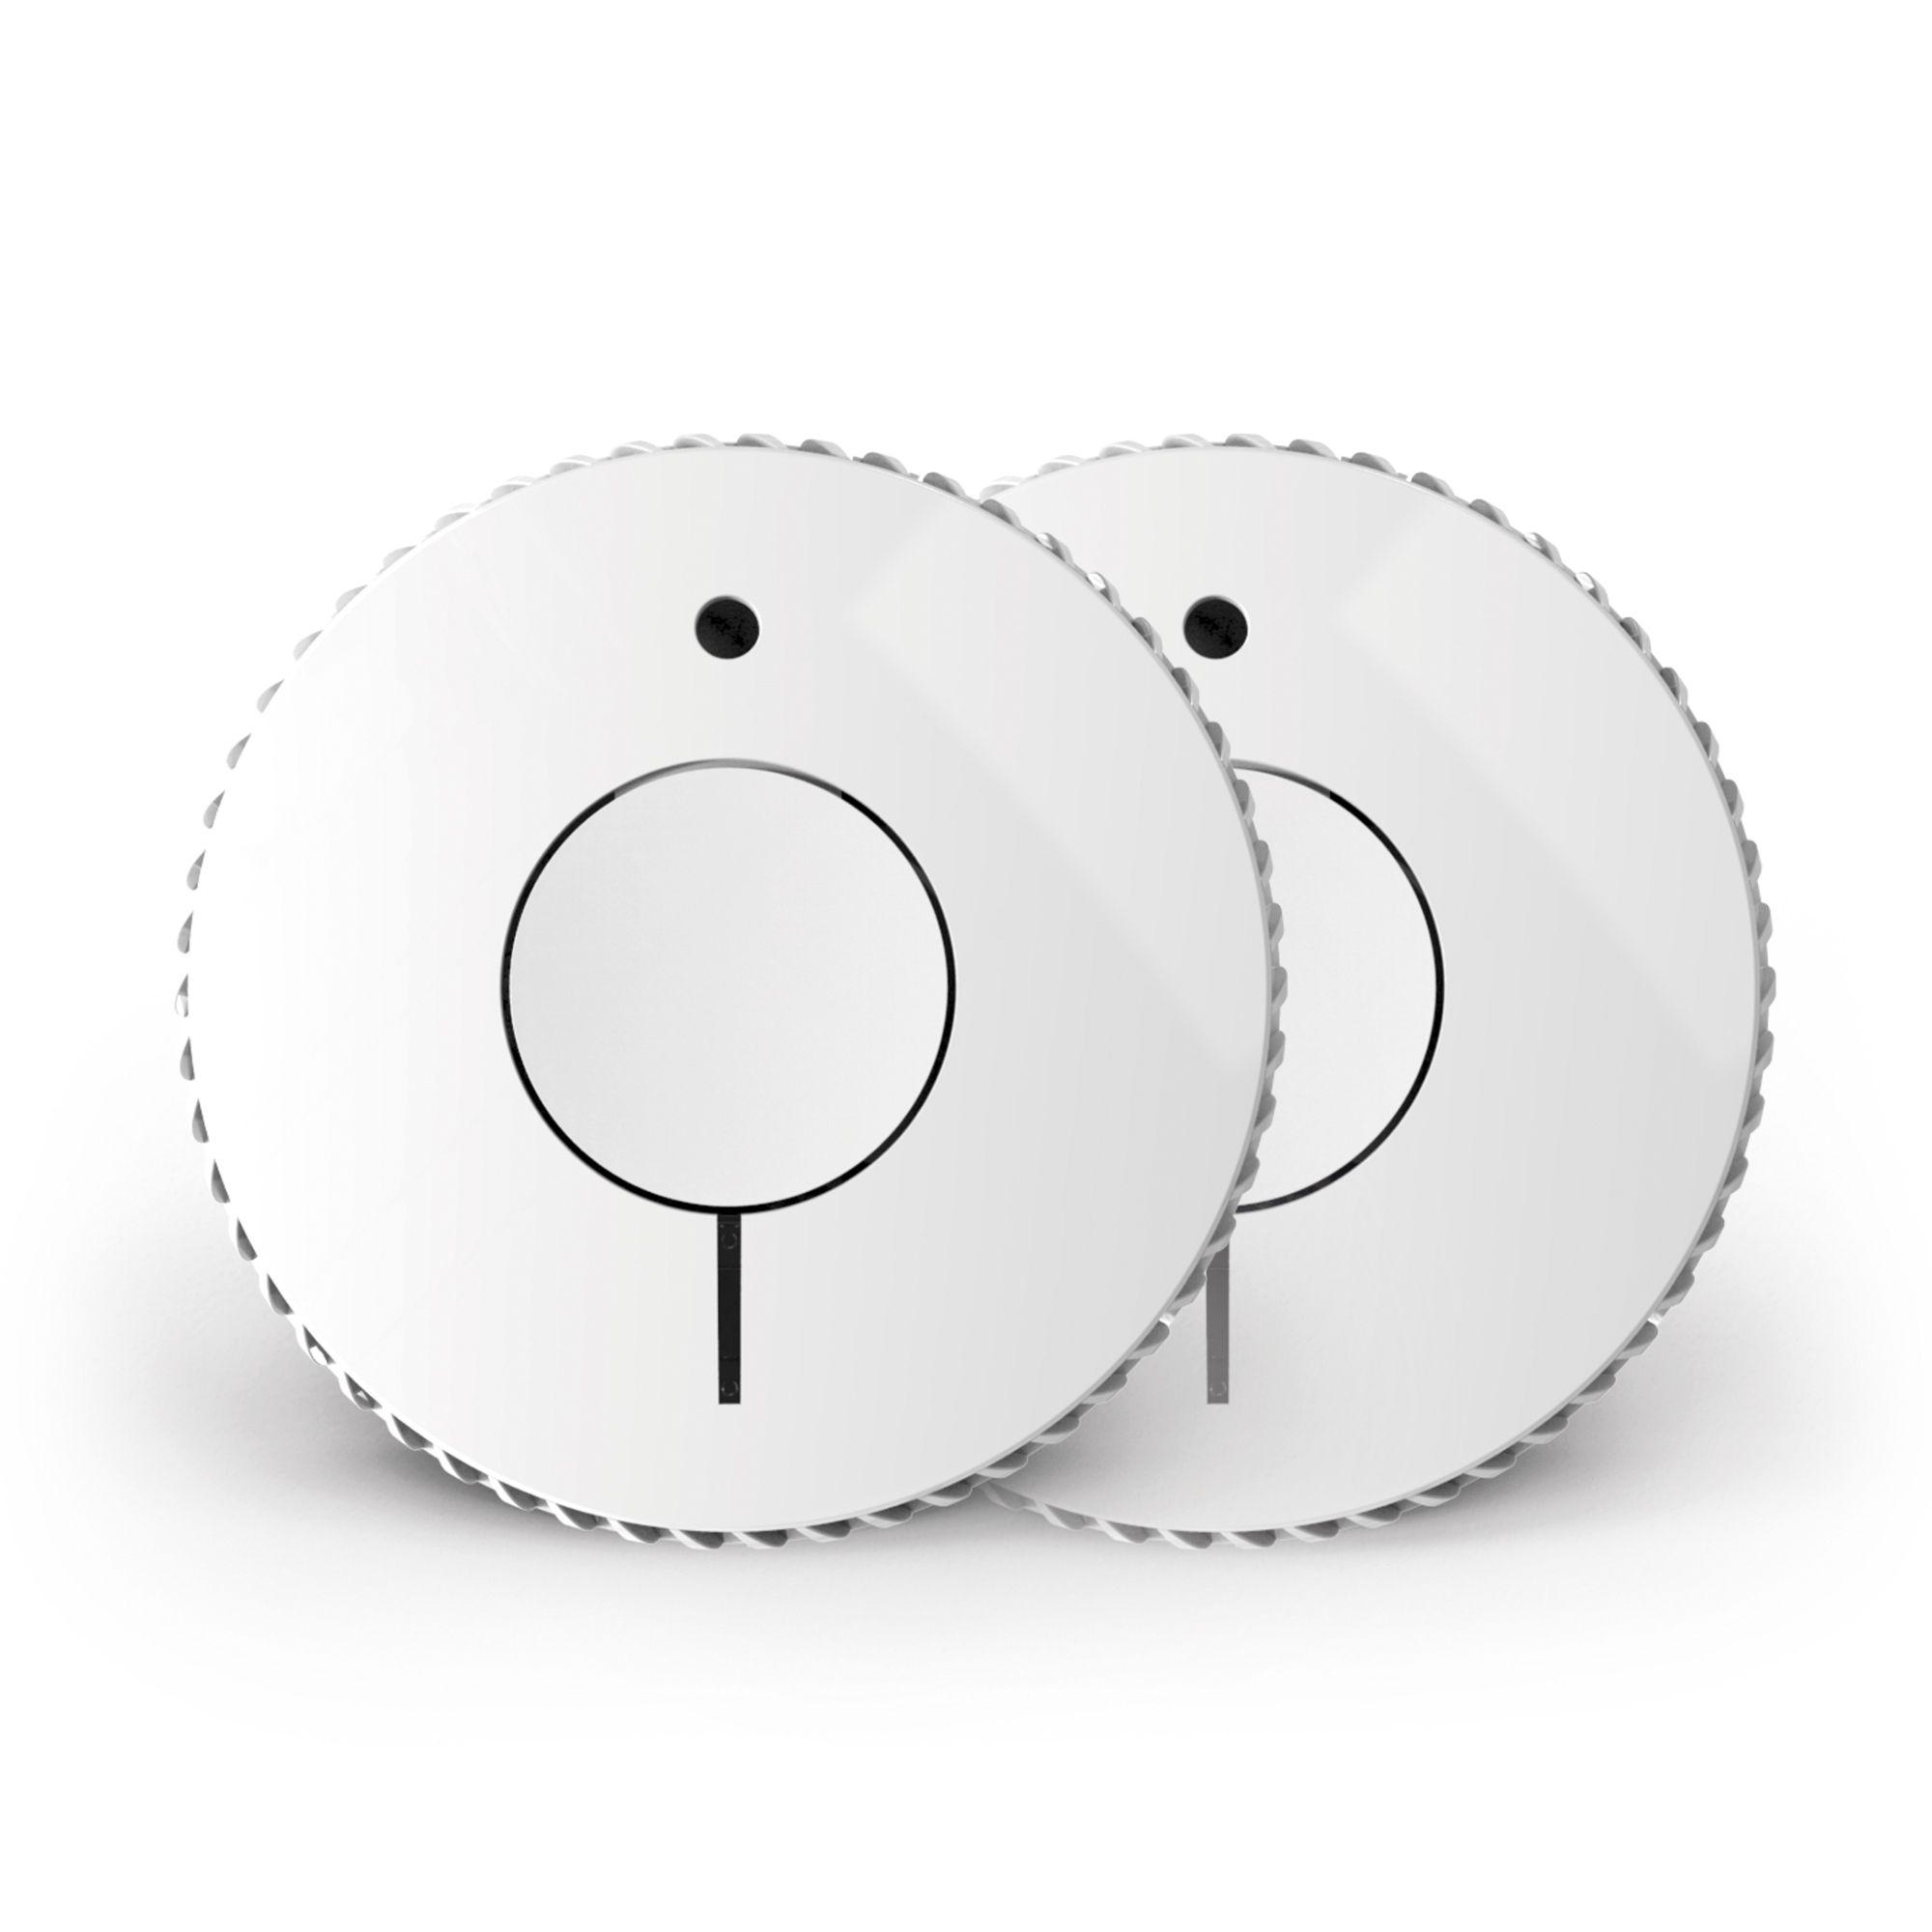 FireAngel Smoke Alarm FA6620-R-T2 Standalone Optical Smoke Alarm with 10-year lifetime battery, Pack of 2